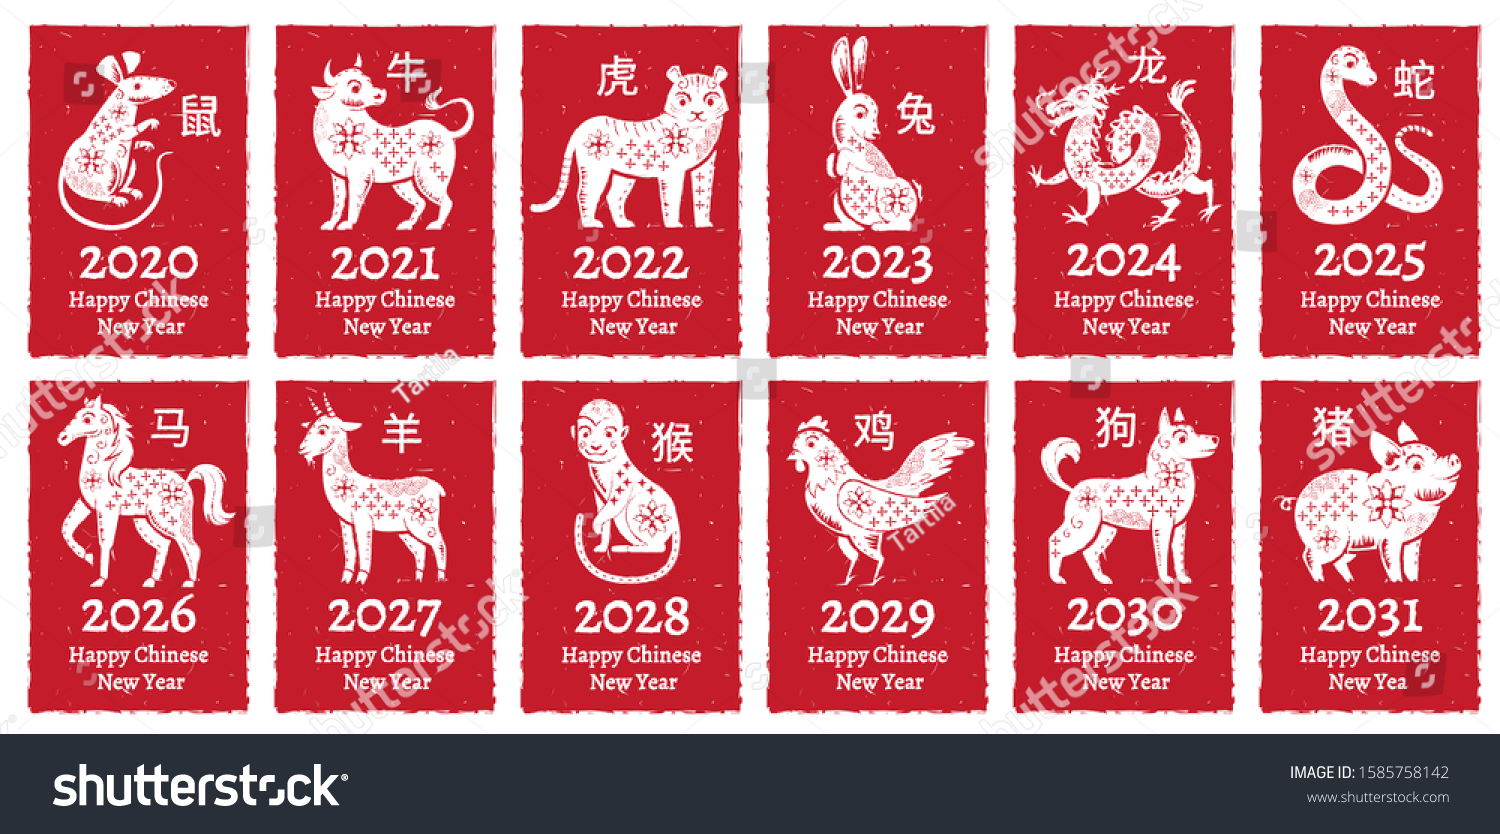 SVG of Chinese New Year Zodiac seal. Traditional china horoscope animals greeting card banner seals stamps. Asian astrology culture 12 zodiac banners, astrological isolated vector icons set svg